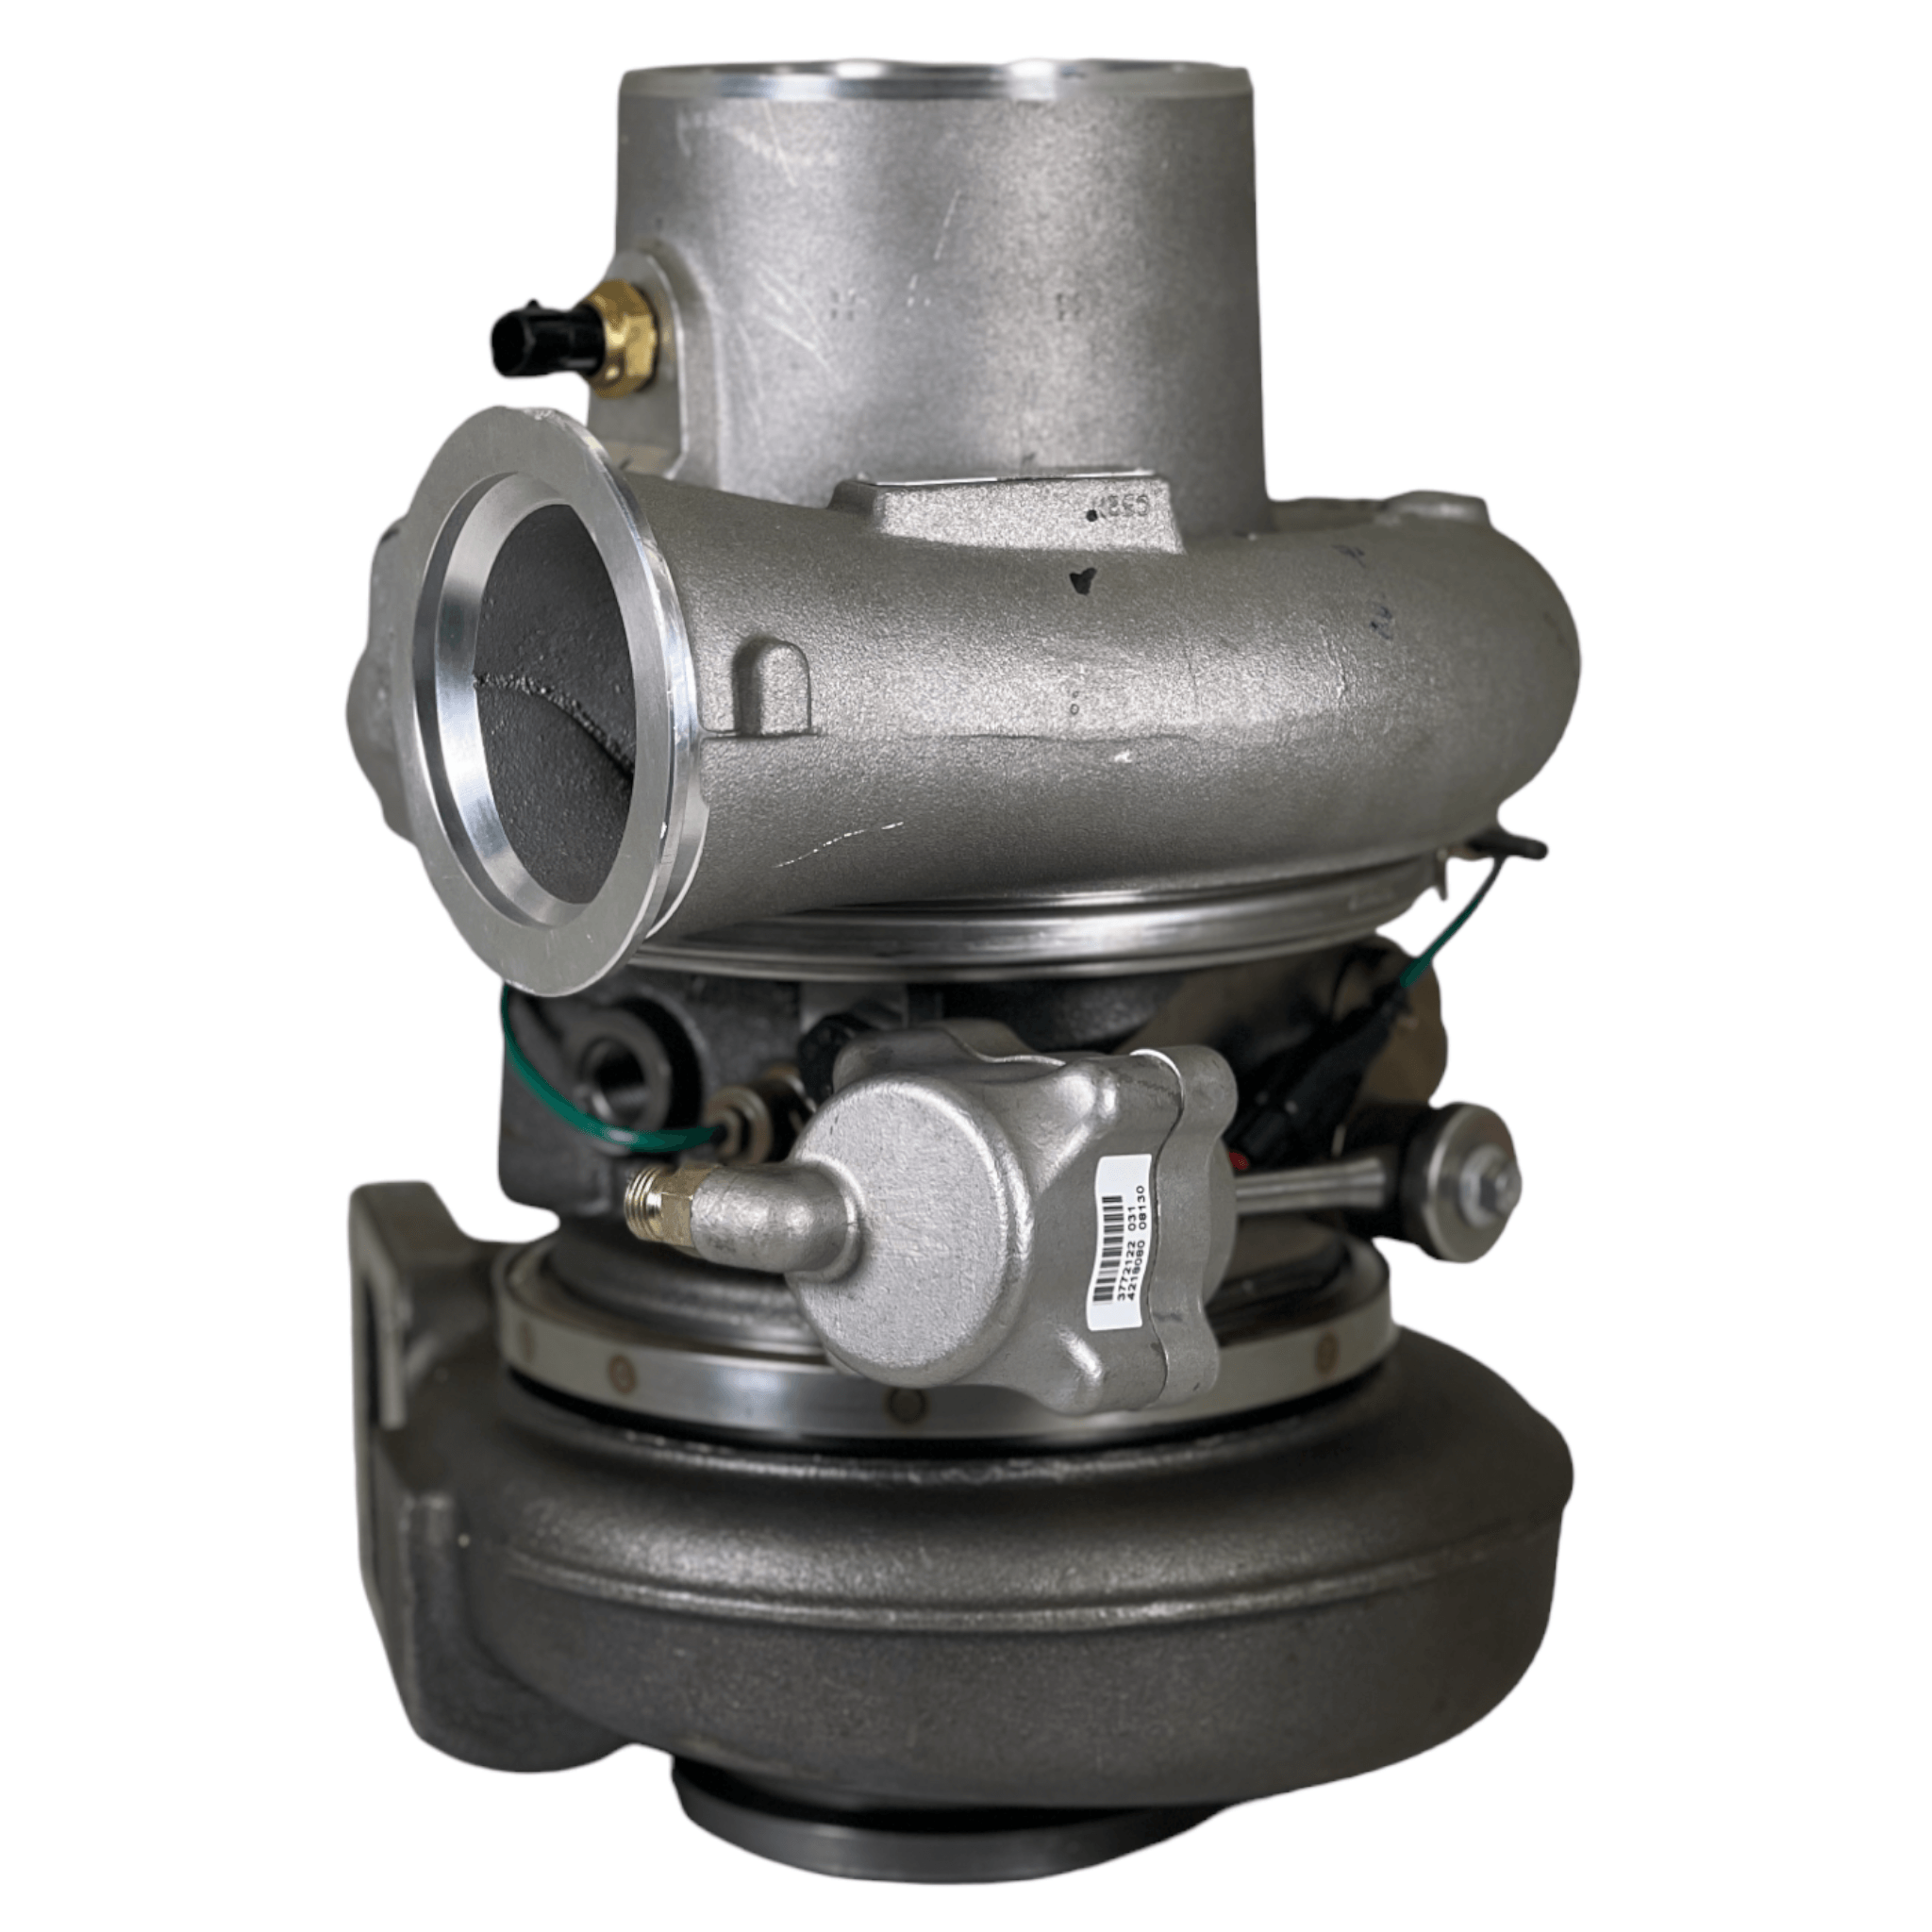 2881993Rx 2881993 Genuine Cummins Turbocharger With Actuator For Isx Qsx15 - ADVANCED TRUCK PARTS